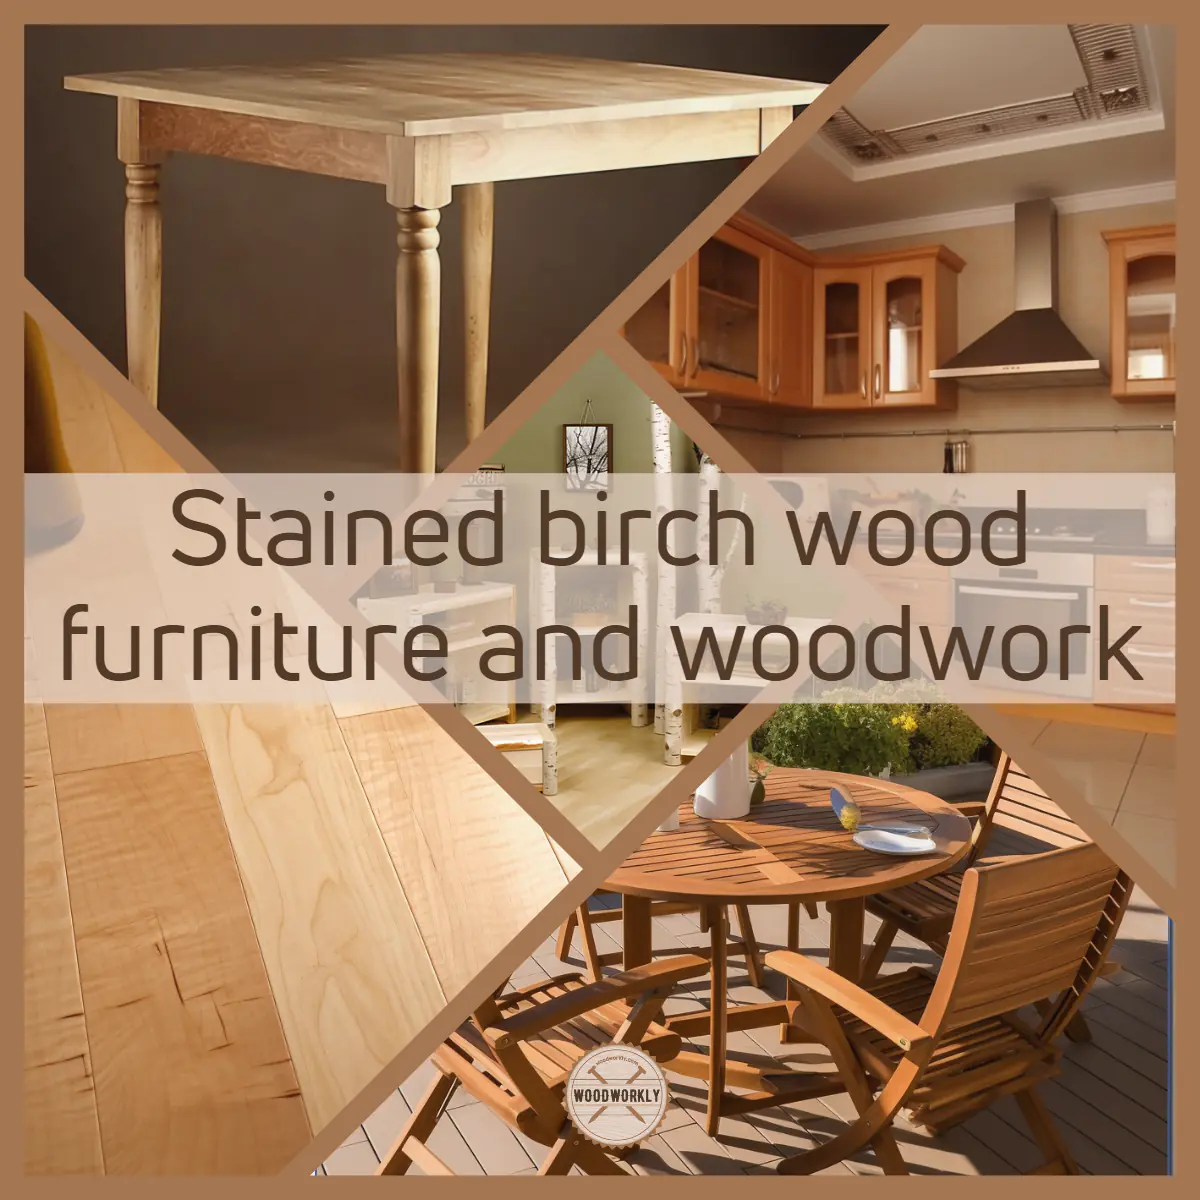 Stained birch wood furniture and woodwork